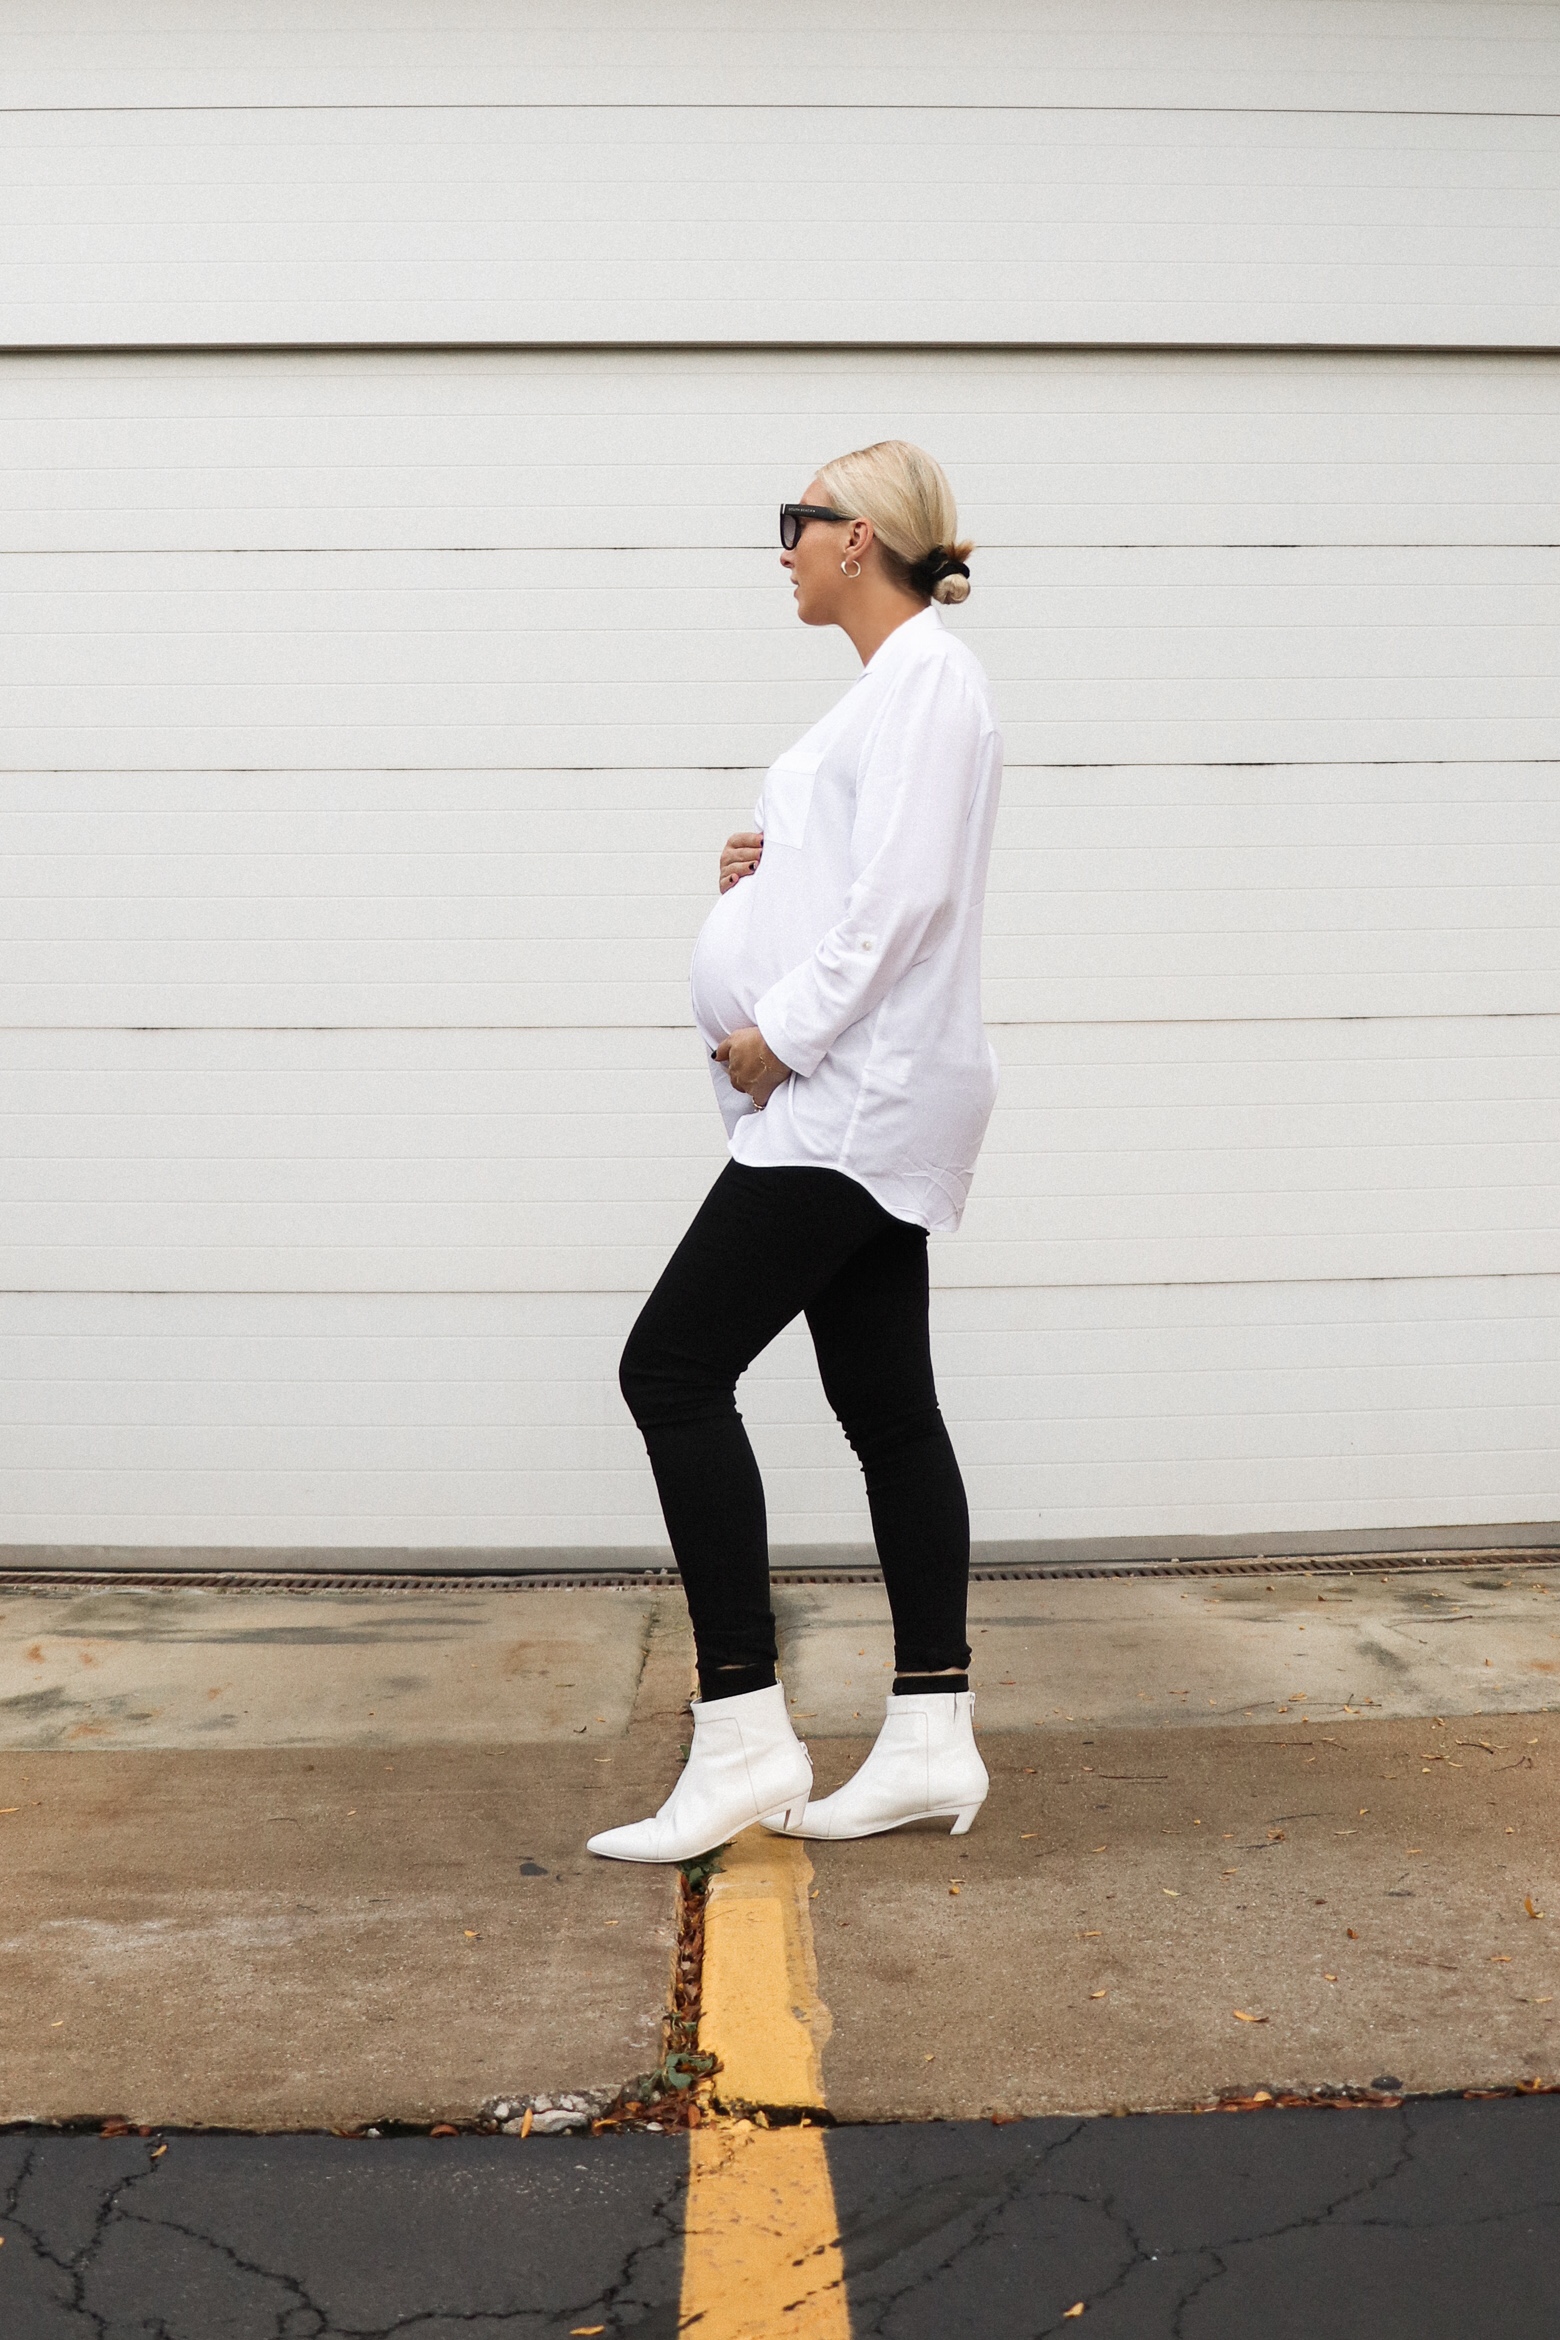 in – in pregnancy! designer staples maternity maternity Pea Meg A Pod best jeans + Fall during invest McMillin to the the from